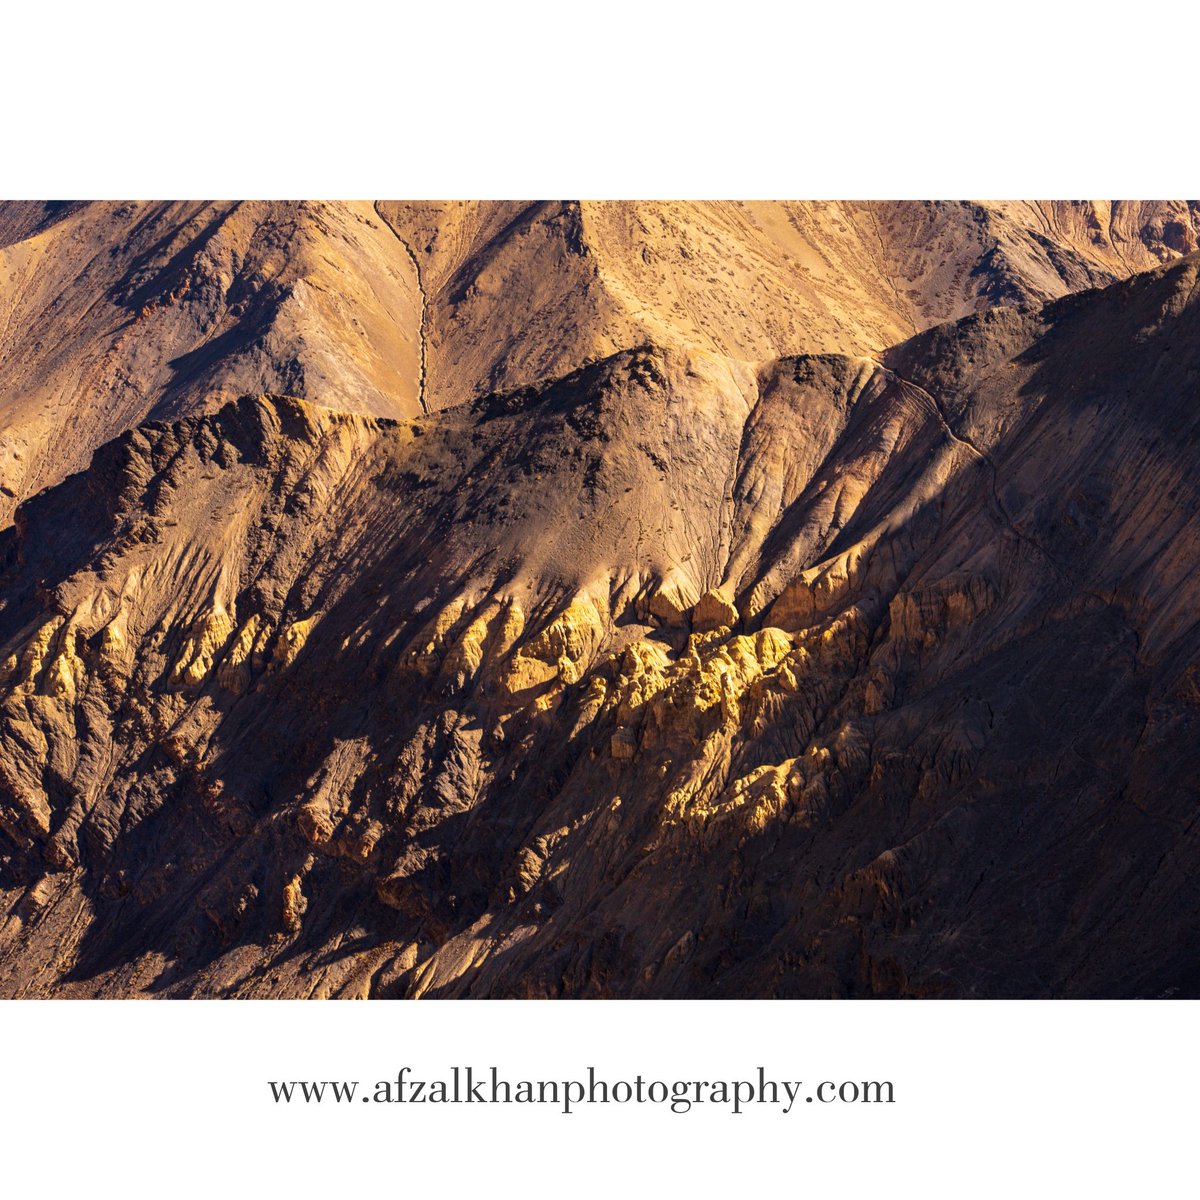 Glorious Rocky Mountains Bathed In Sunlight
#ladakh_lovers #ladakh_beauty #mountainslovers #mountainview #mountain #ladakhmountains #nature #naturecaptured #landscapephotomag #landscape_captures #landscapes #landscapephotography #landscapephotographyindia #abstractphotography